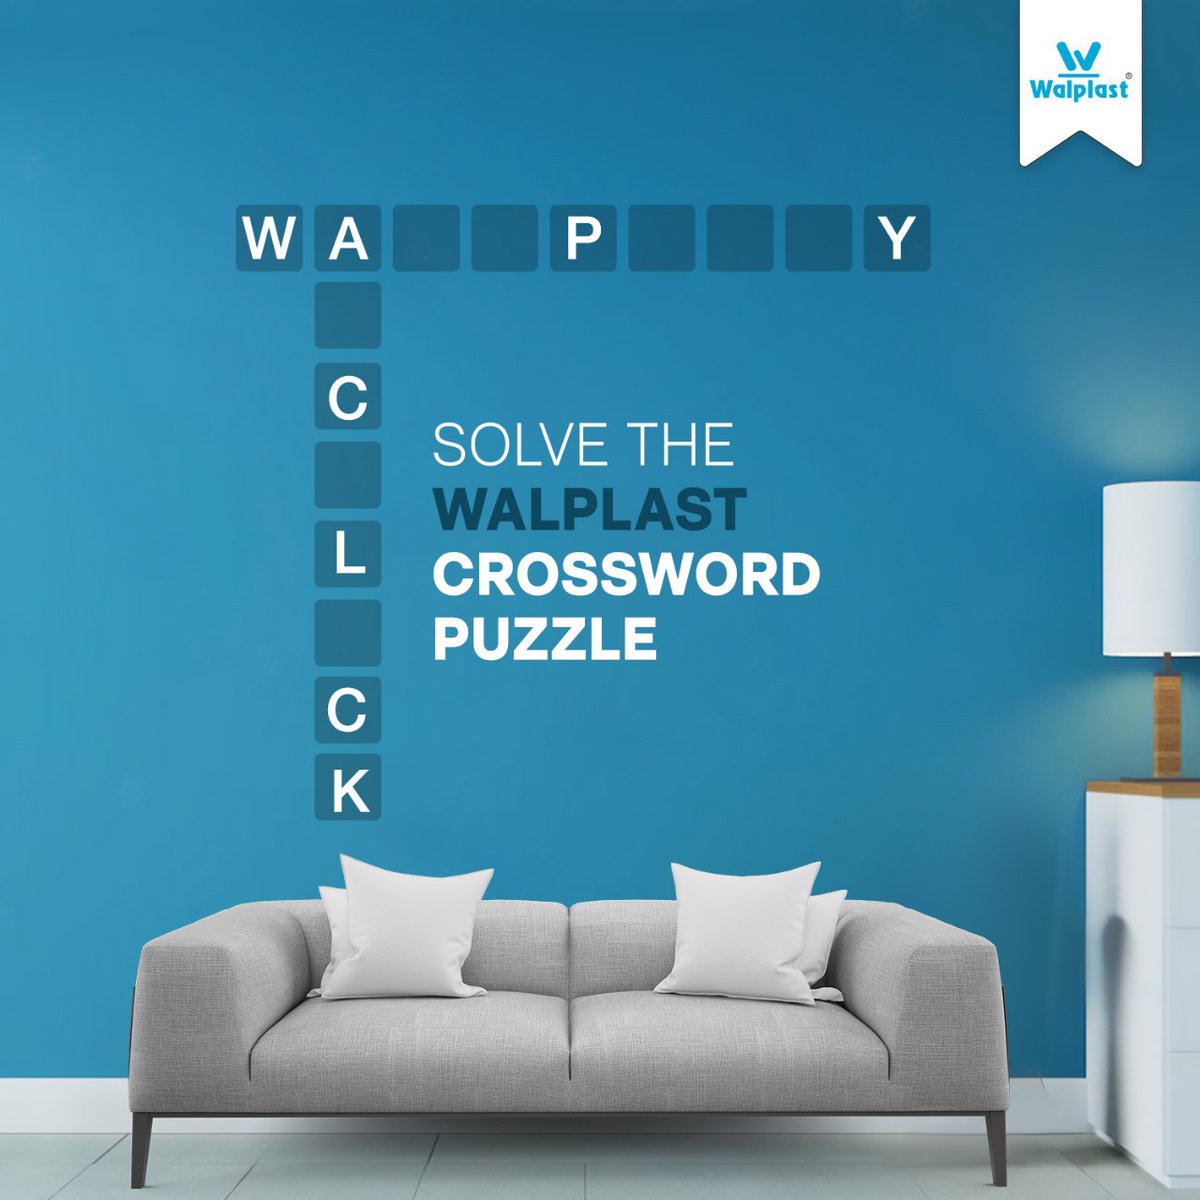 Can you solve the Puzzle? 
Then drop your answer below 👇
💡 Hint: The answer is a word associated with our products. 🏠
Don't forget to challenge your friends by tagging them too! 🤝

#Walplast #HomeSure #Puzzle #GuesstheWord #Challenge #WordGame